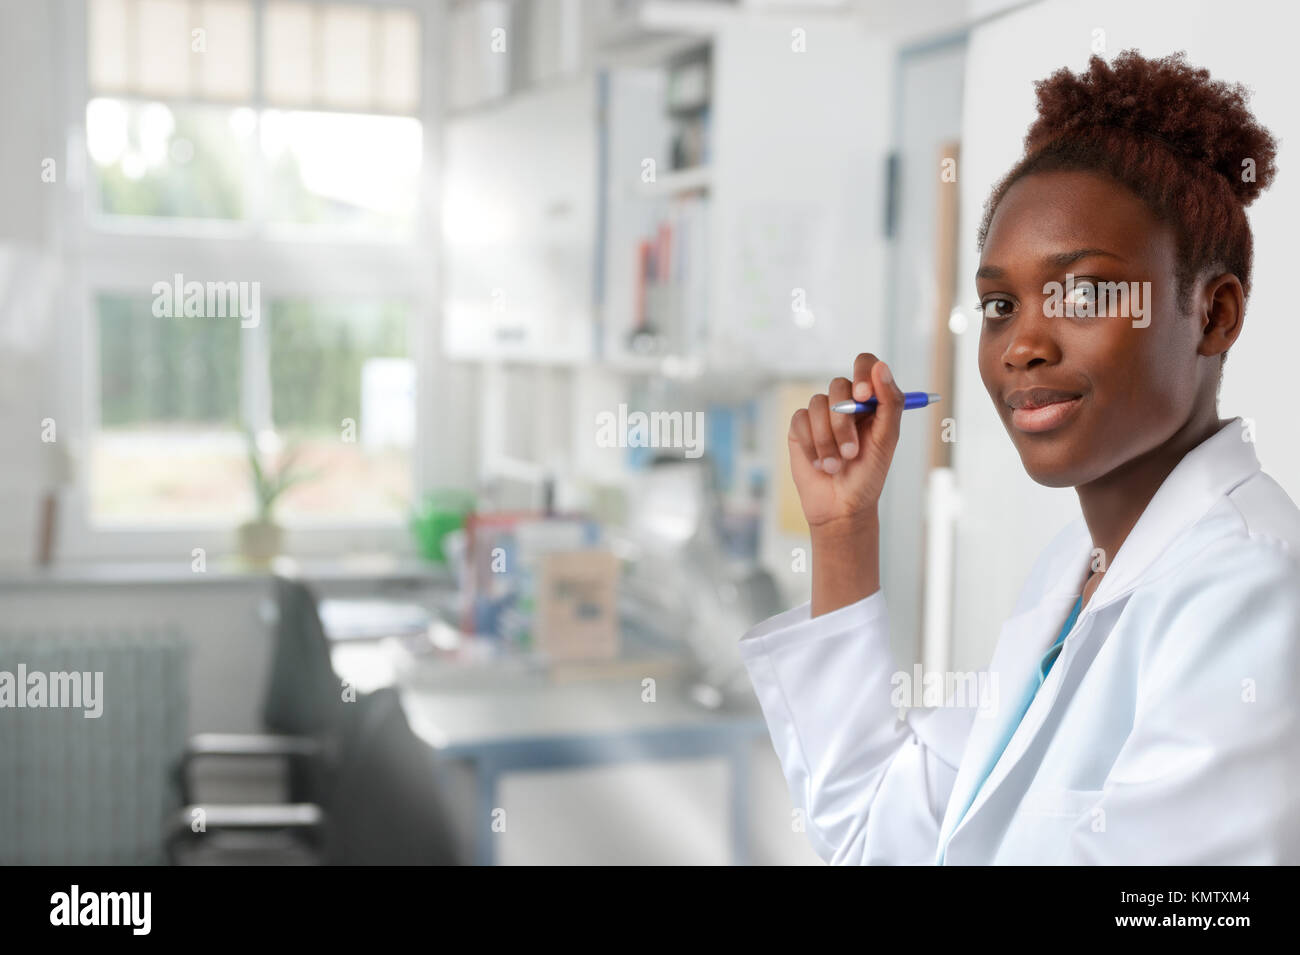 African scientist, medical or or graduate student. Bright, confident young woman wearing lab coat holds a pen in a doorway of her office. Stock Photo